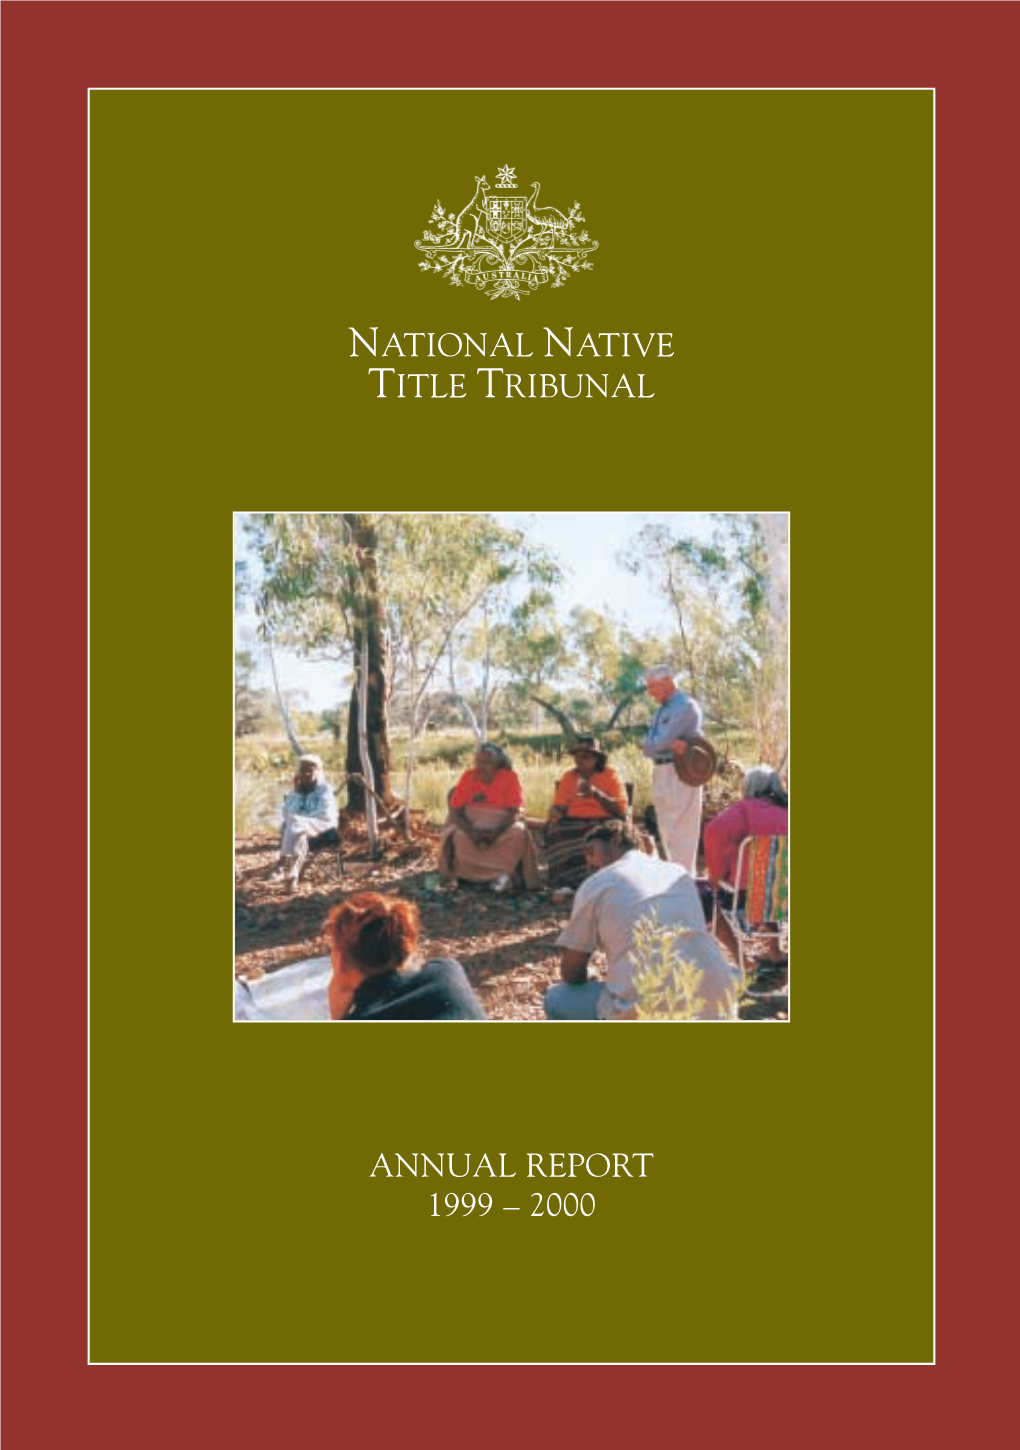 National Native Title Tribunal Annual Report 1999 – 2000